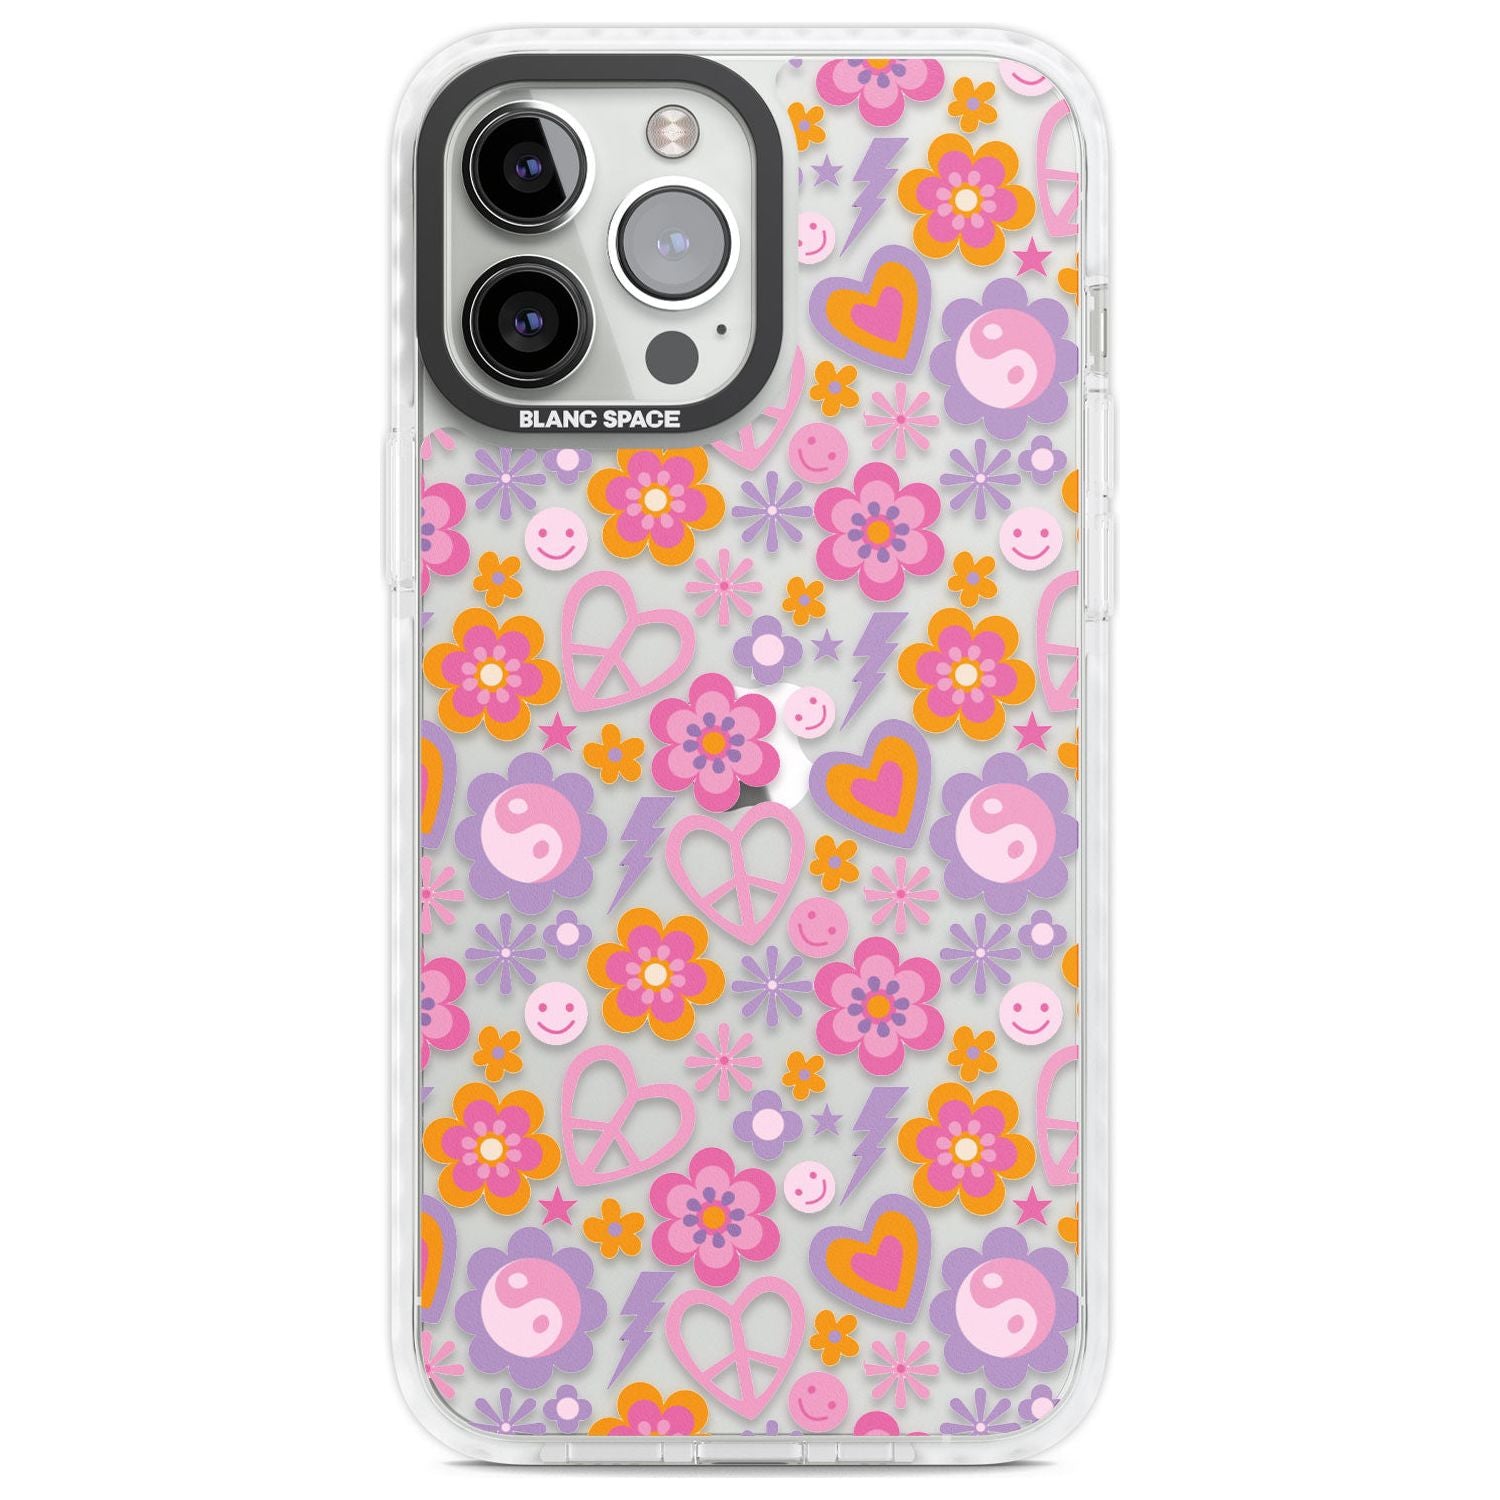 Peace, Love and Flowers Pattern Phone Case iPhone 13 Pro Max / Impact Case,iPhone 14 Pro Max / Impact Case Blanc Space